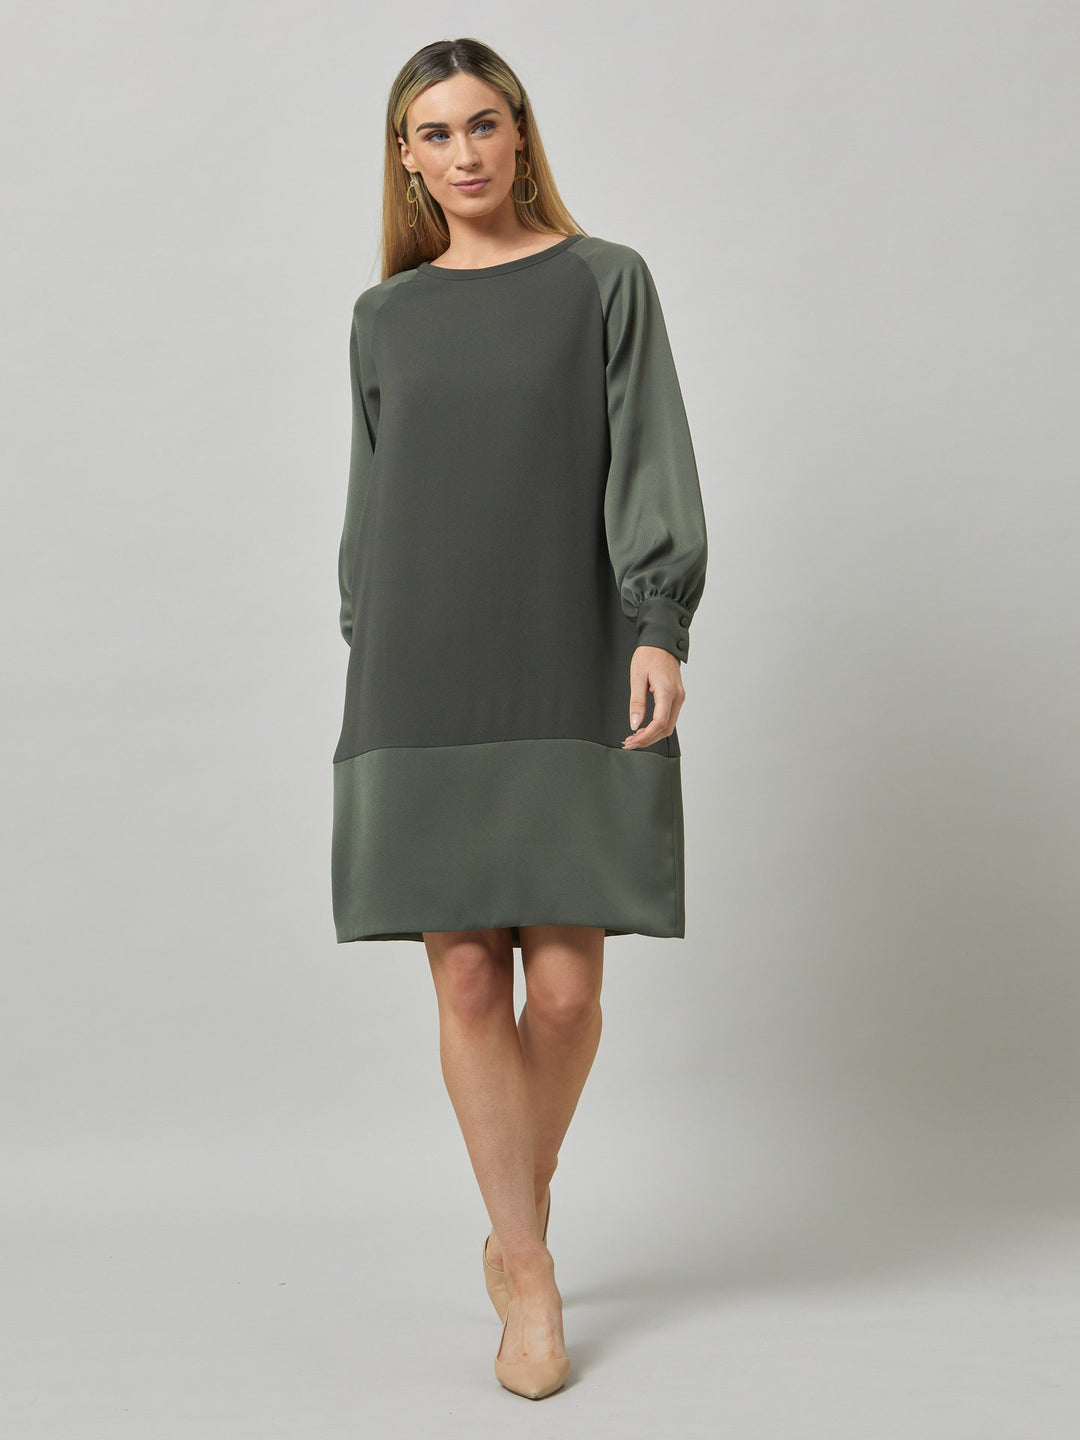 Introducing Sarah, a chic and effortlessly stylish shift dress that brings a fresh perspective to occasion wear. Crafted from luxurious olive satin back crepe, it offers a simple and easy-fit silhouette. The satin raglan sleeves add a touch of sophistication, while the deep satin band at the hem enhances the overall elegance. With convenient side seam pockets, Sarah provides both comfort and functionality. Embrace the versatility and timeless appeal of this dress, perfect for various occasions.